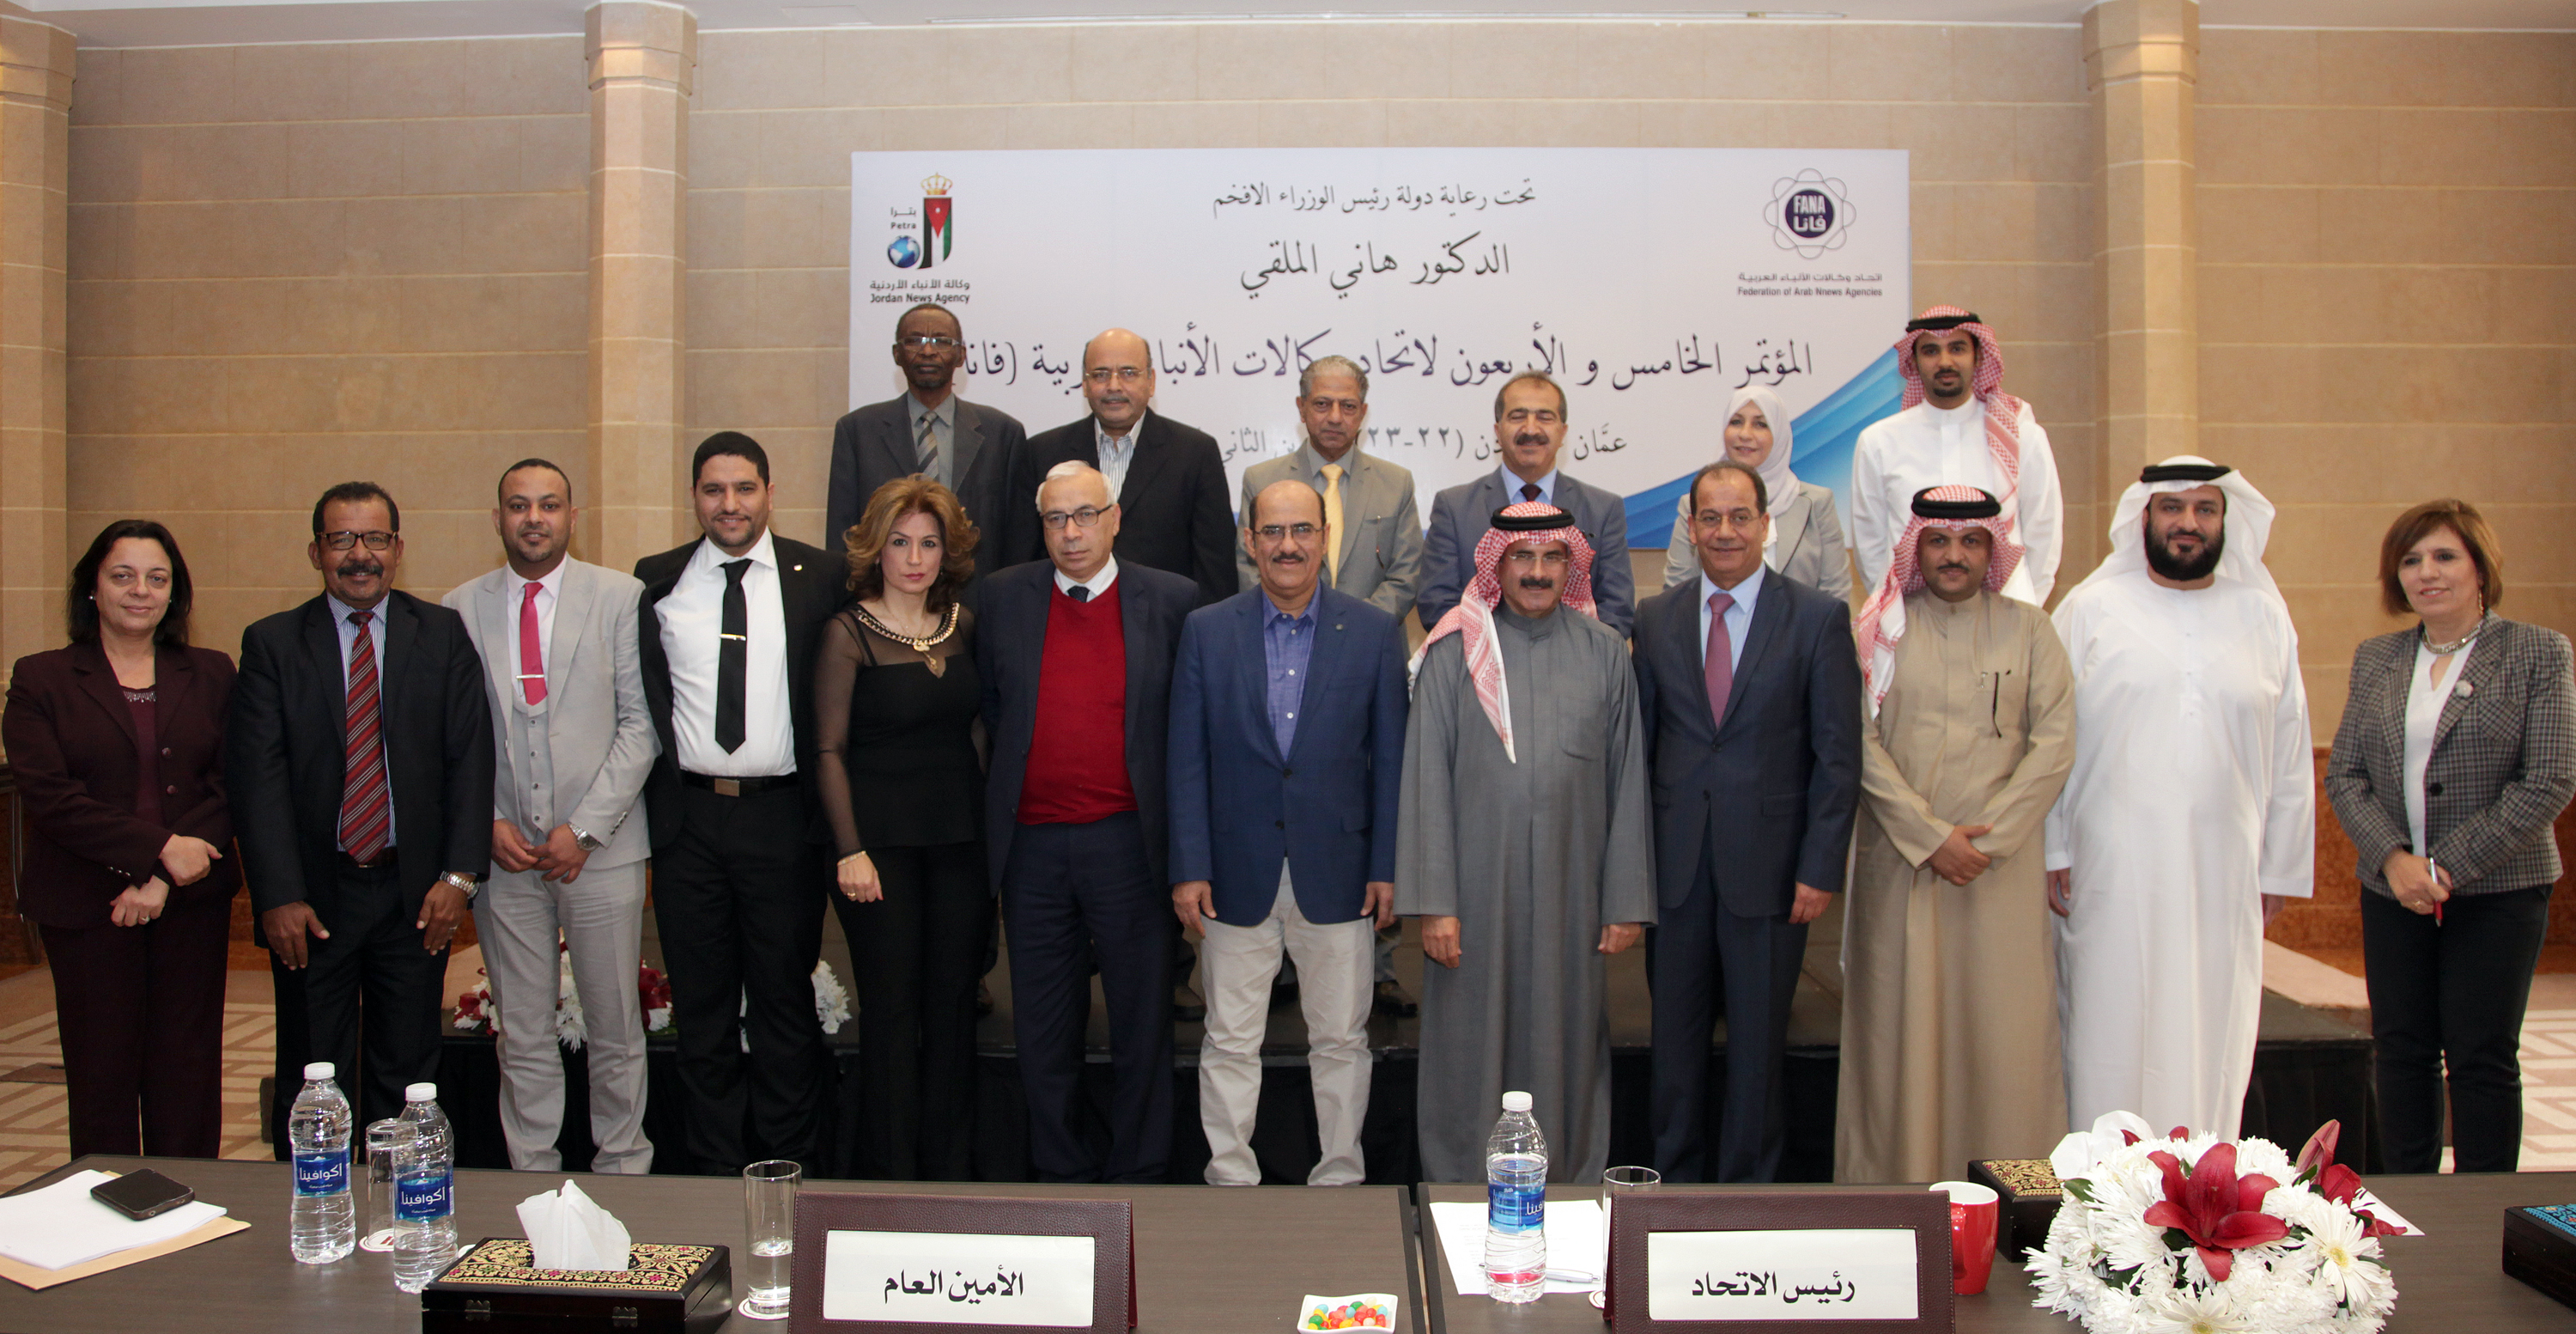 FANA wraps up 45th Assembly in Amman